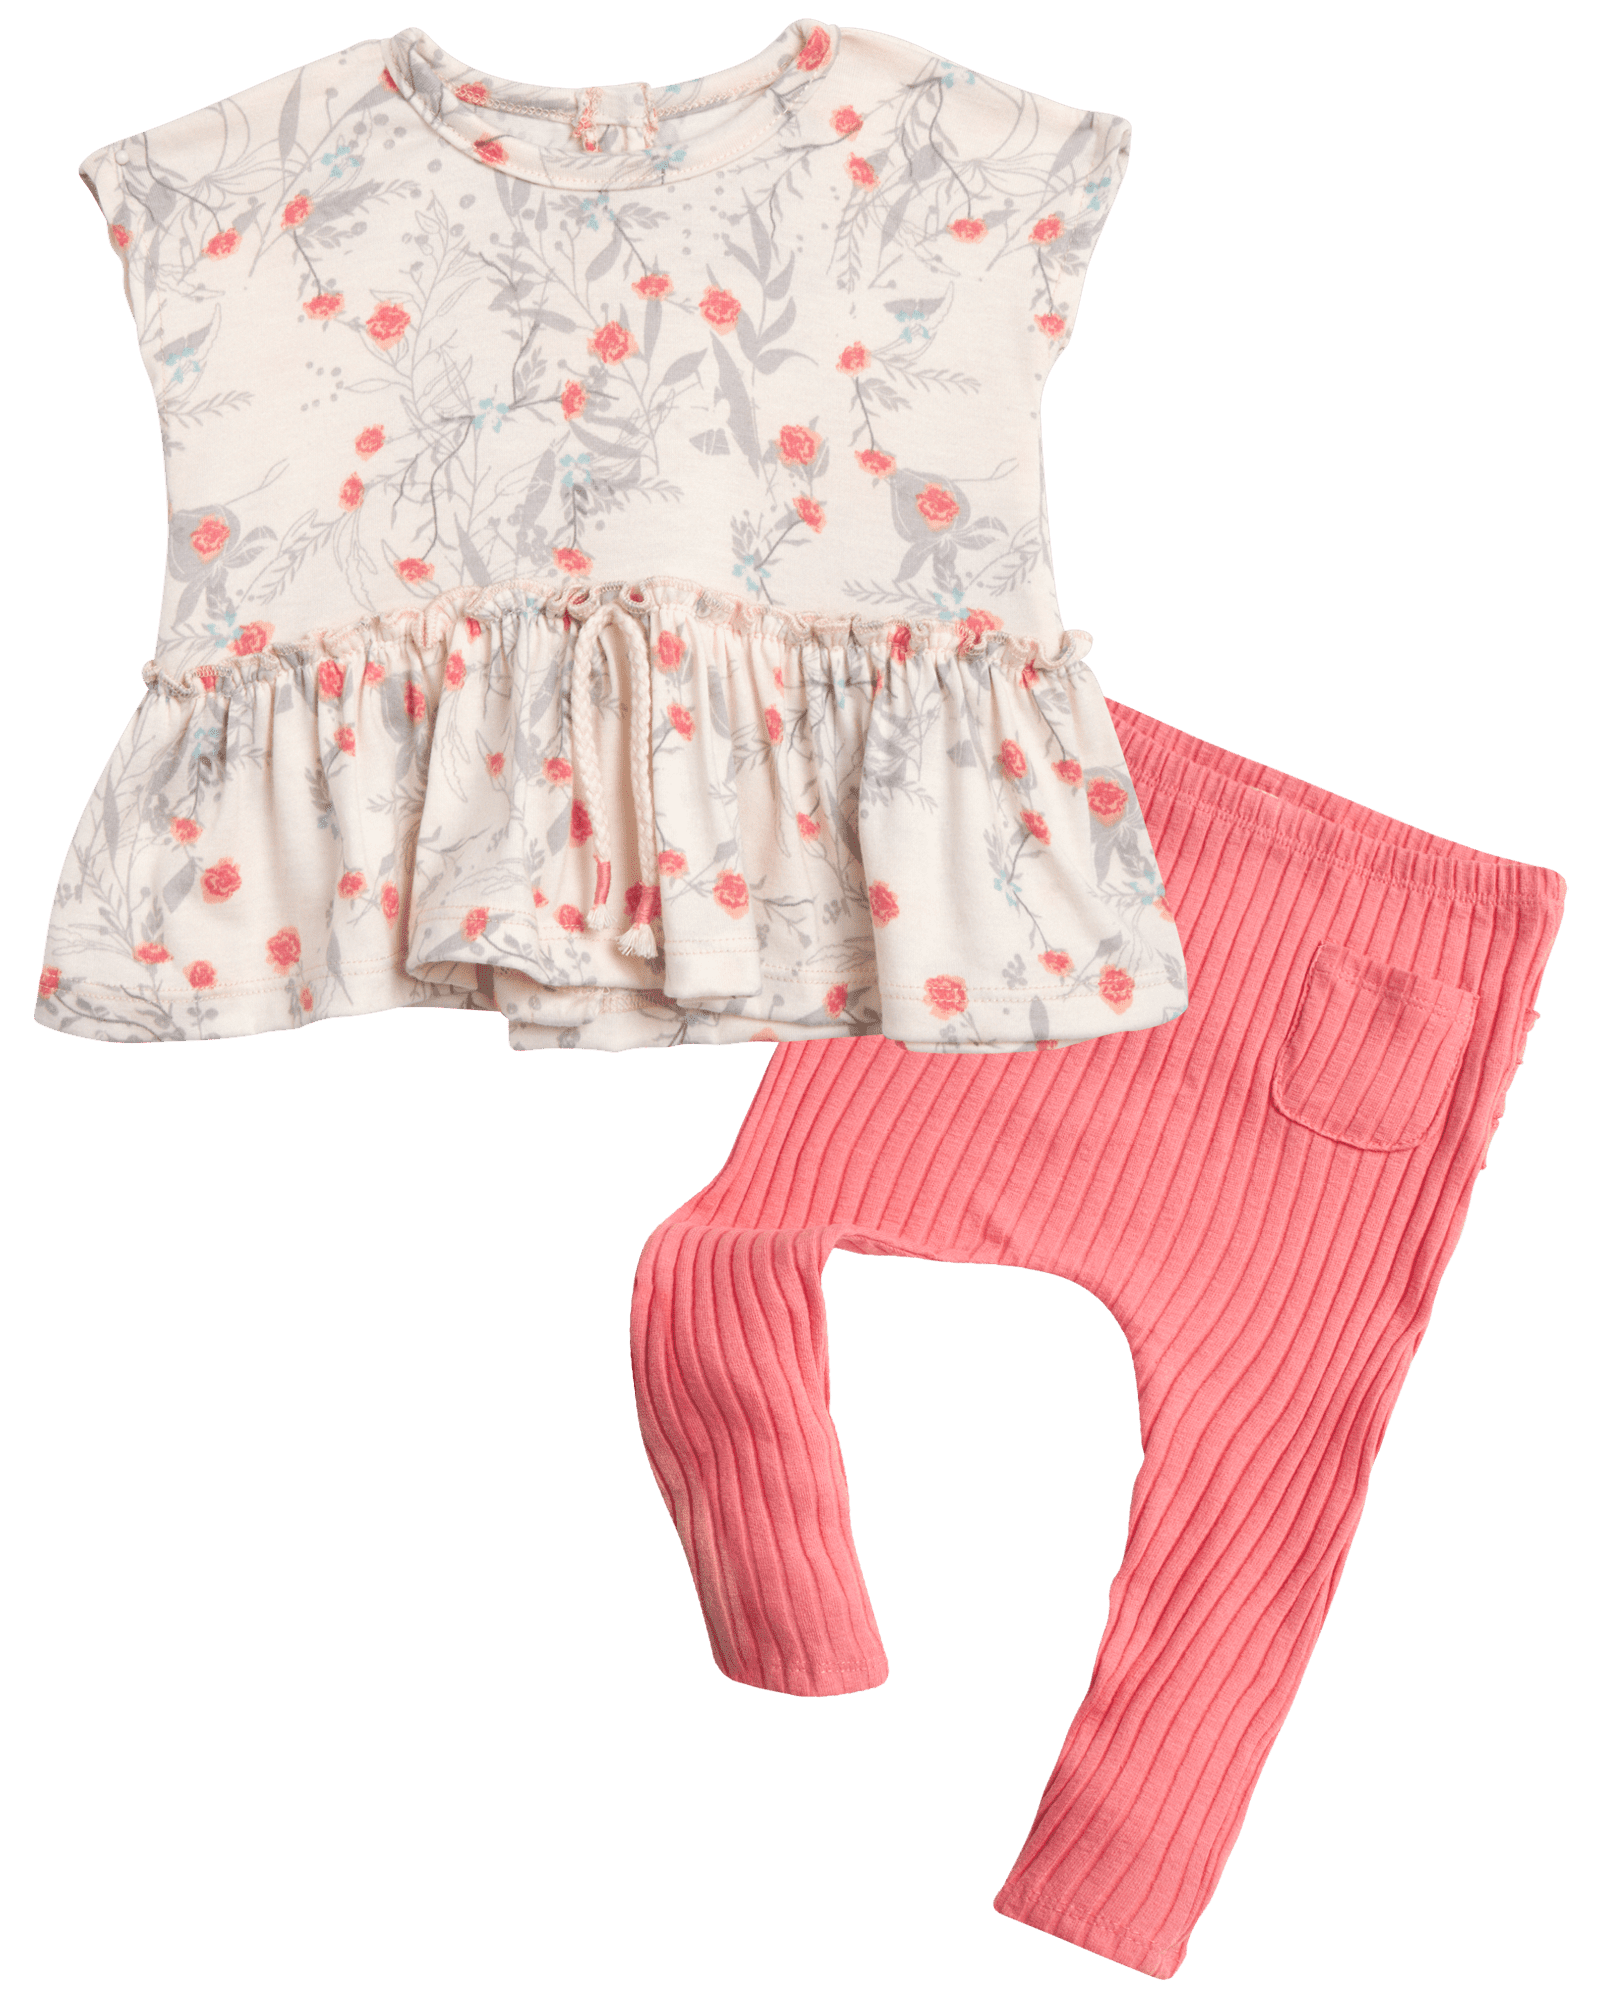 Pimfylm Cotton Baby Pants for Girls to 24 Month Sizes Rose Gold 3-4 Years